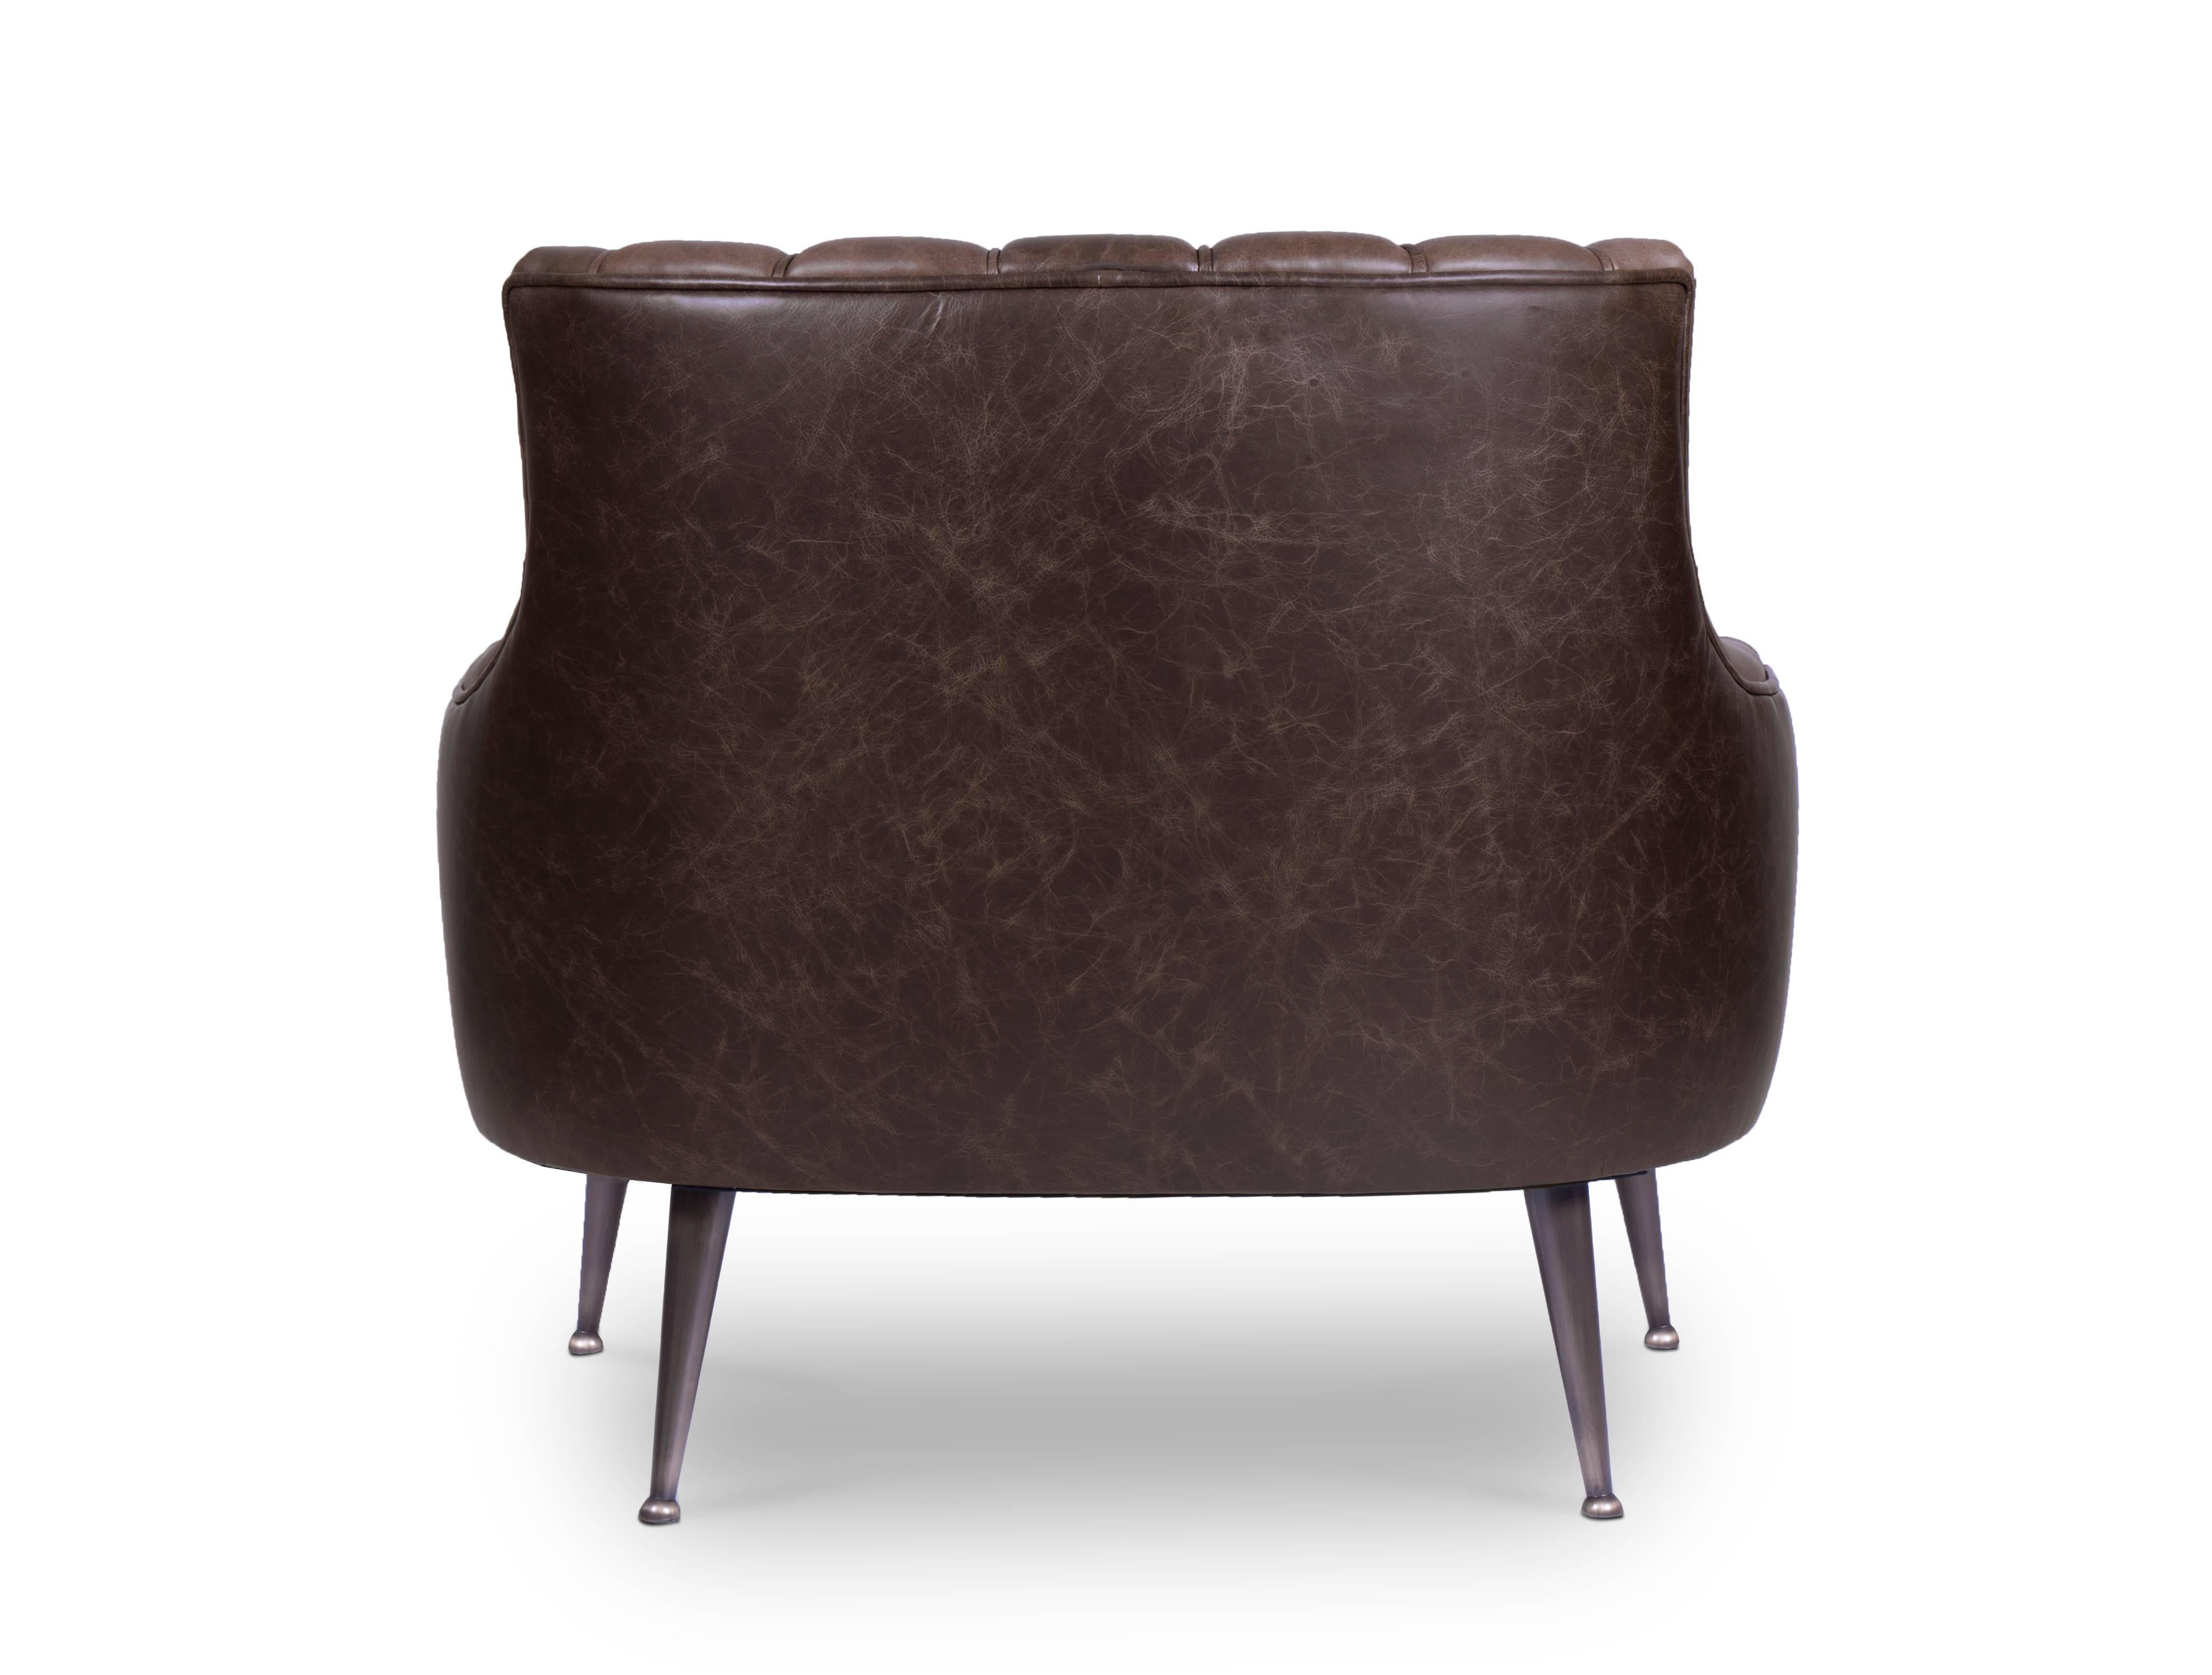 Contemporary Modern European Brown Ruched Faux Leather and Aged Brass Armchair For Sale